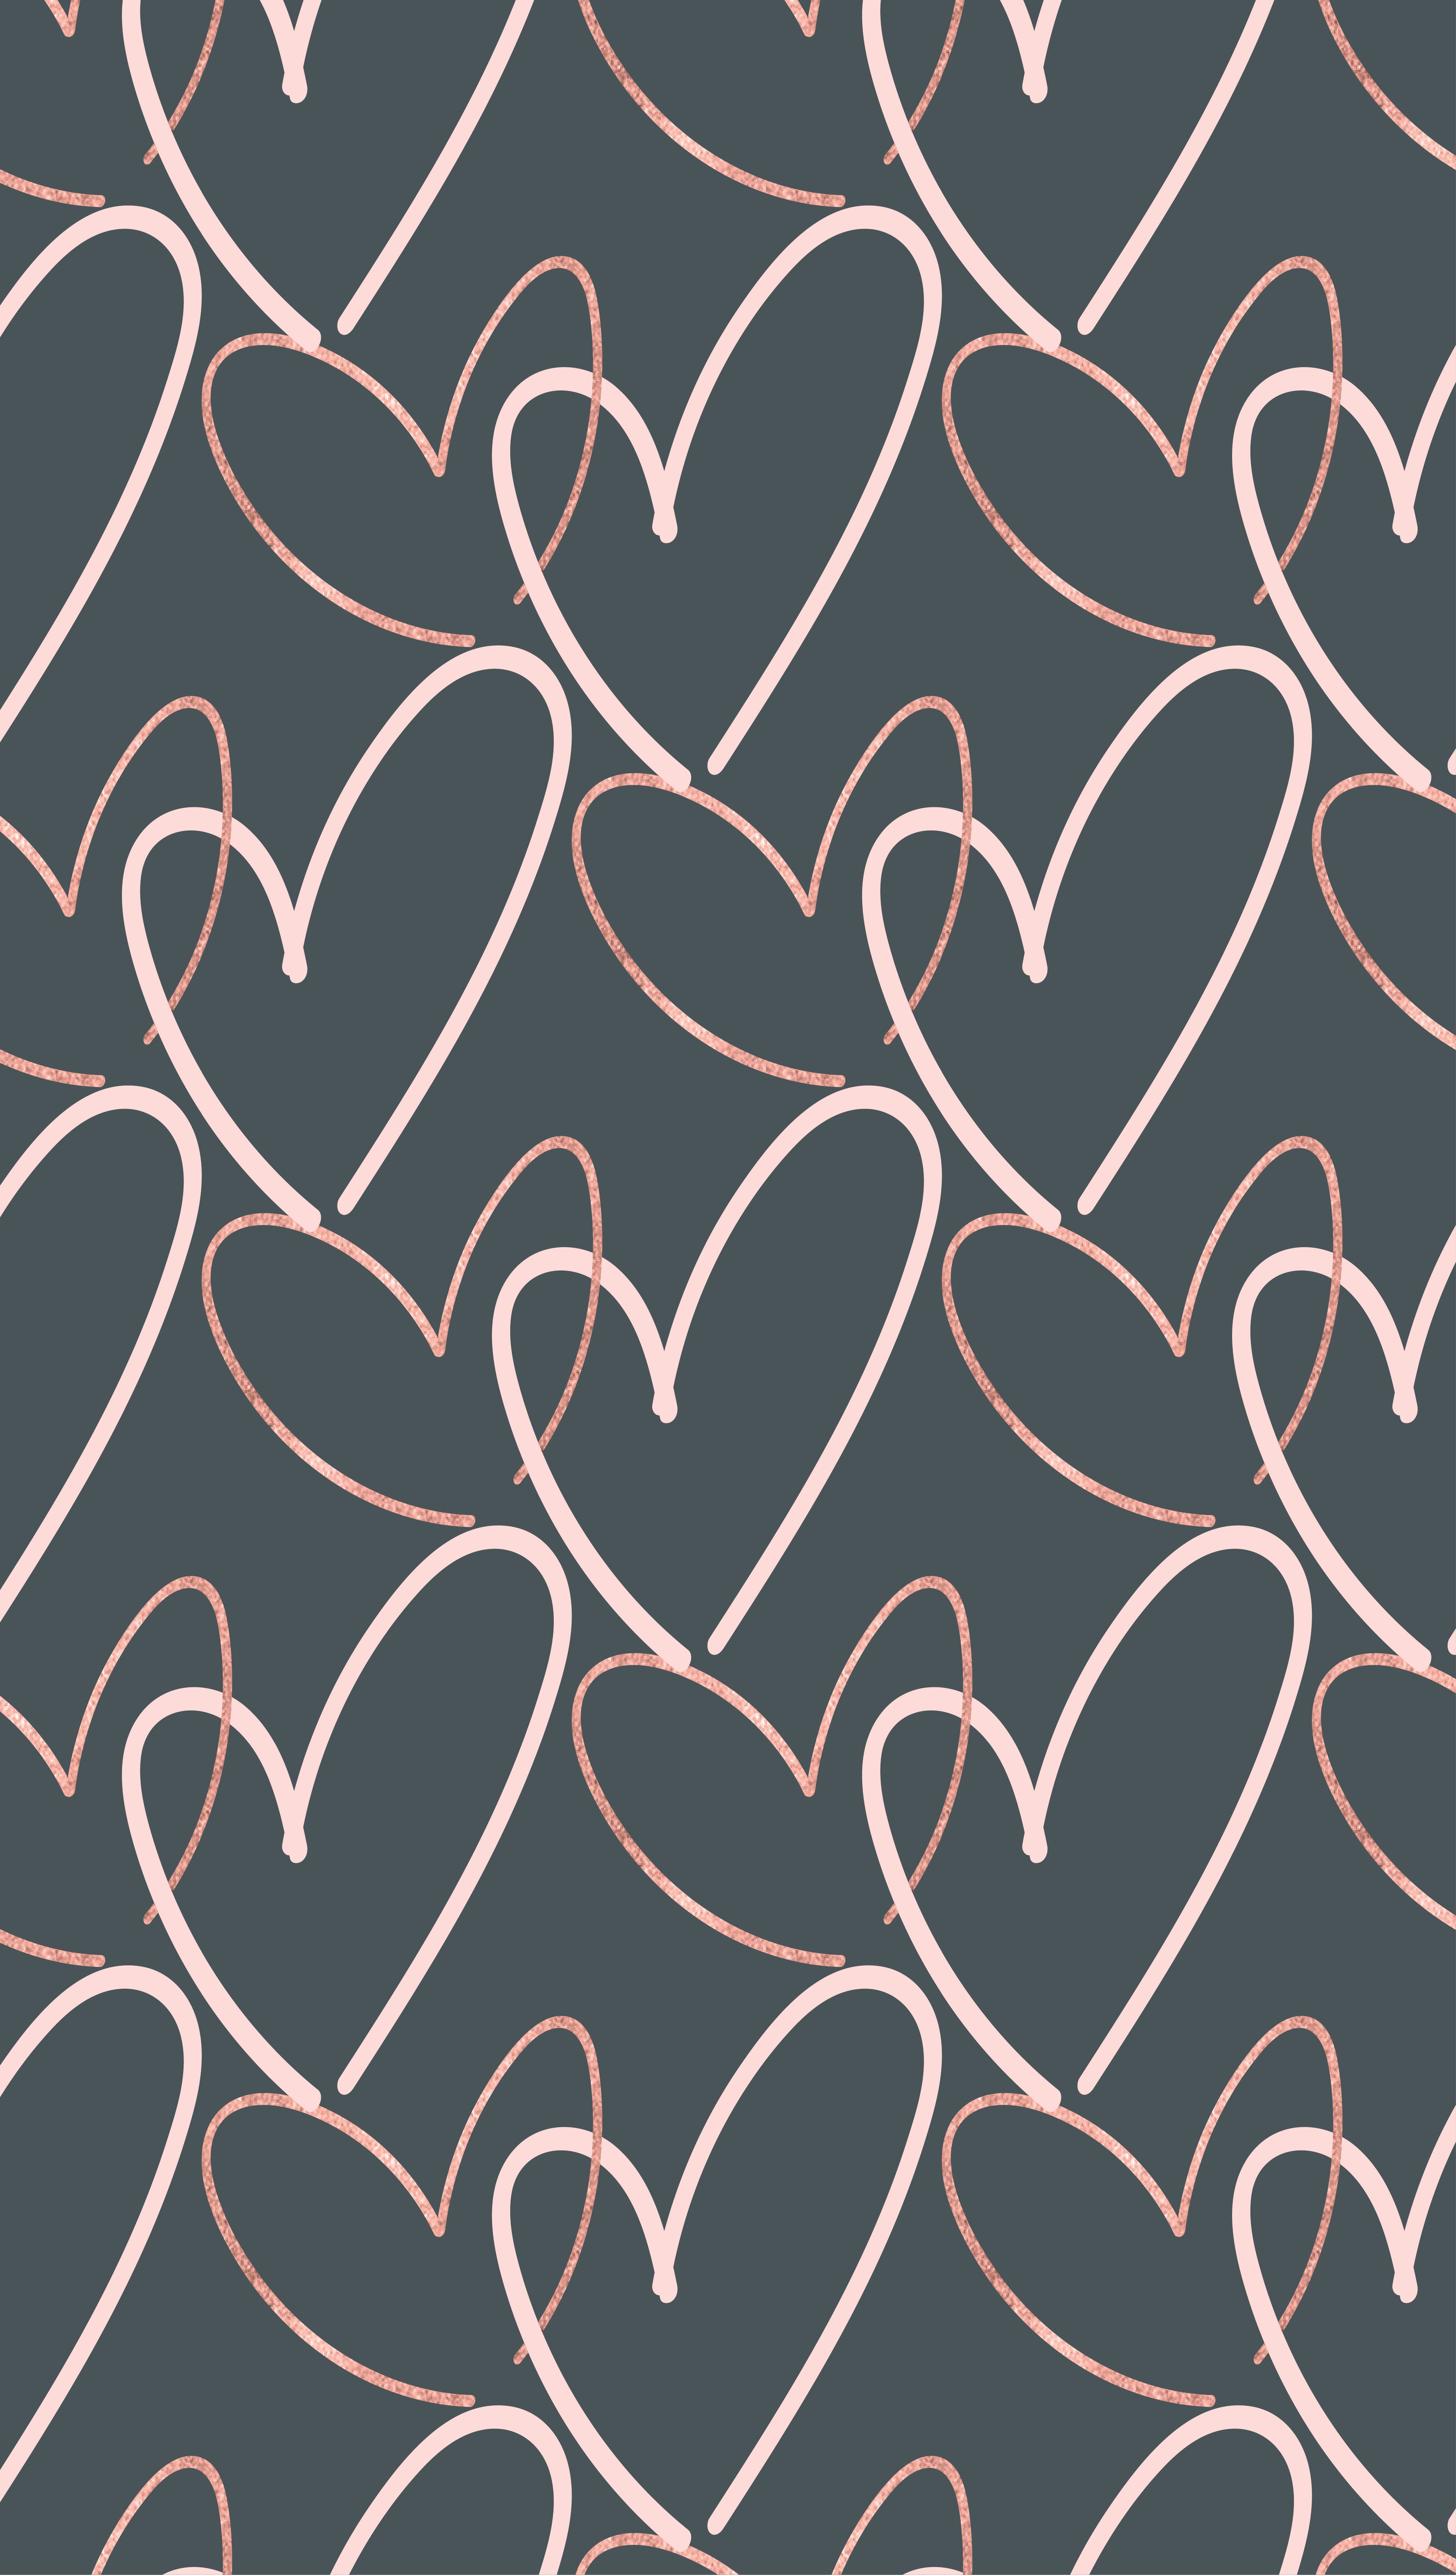 FREE Valentine's Day hearts phone background wallpaper in 2020